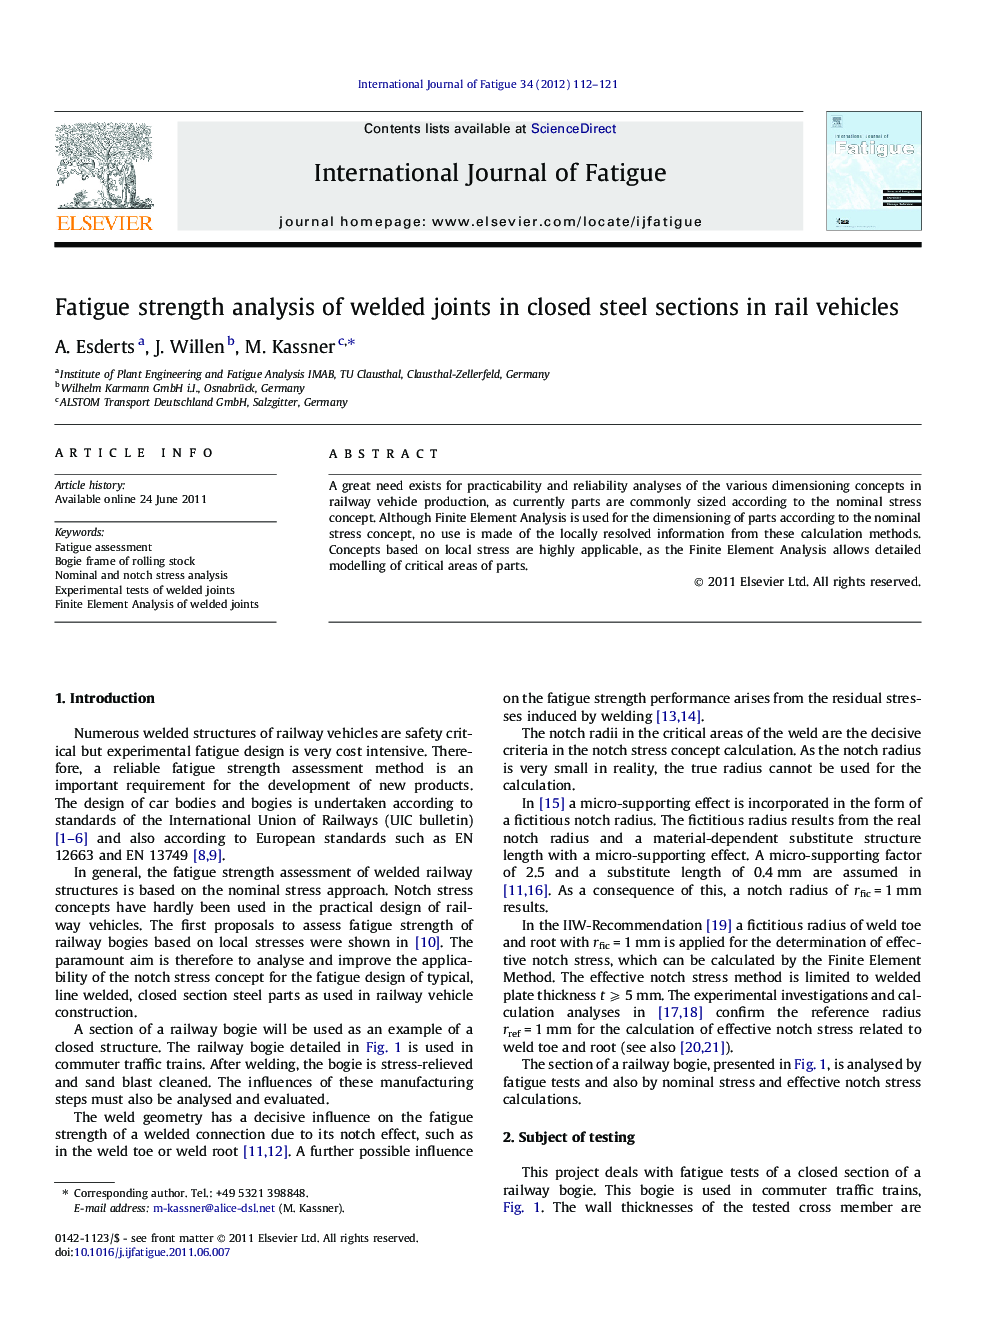 Fatigue strength analysis of welded joints in closed steel sections in rail vehicles